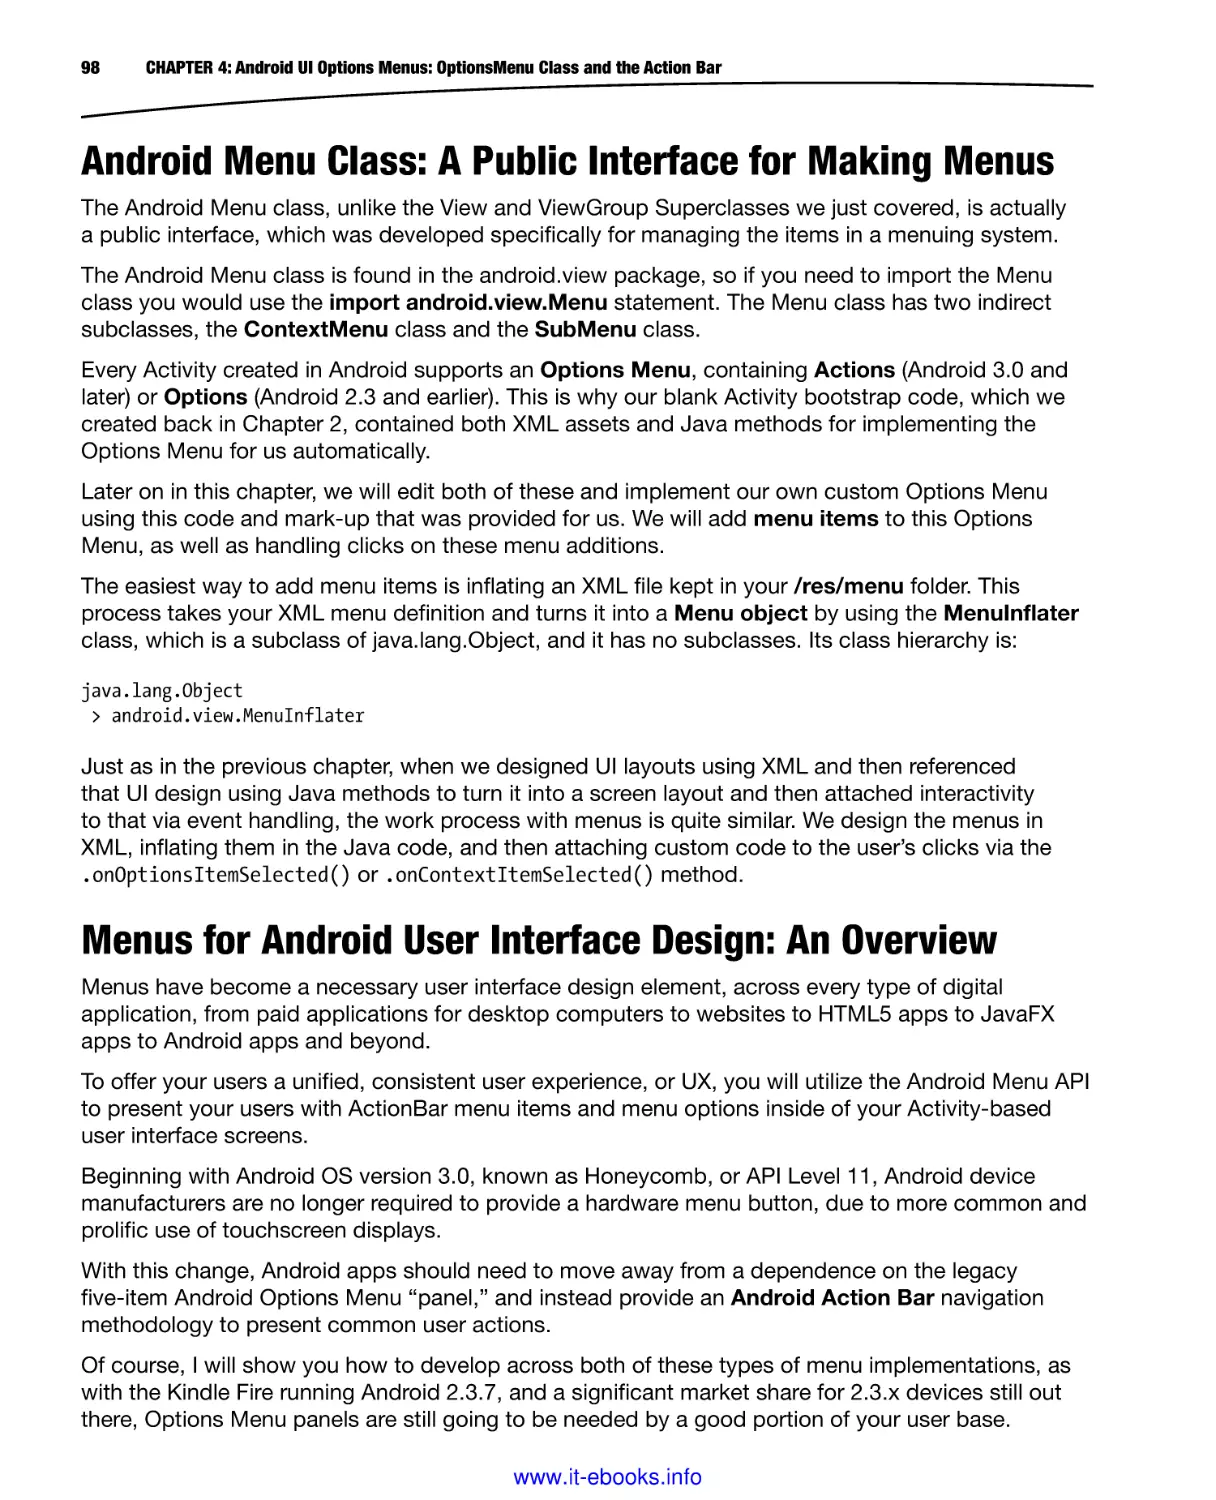 Android Menu Class
Menus for Android User Interface Design